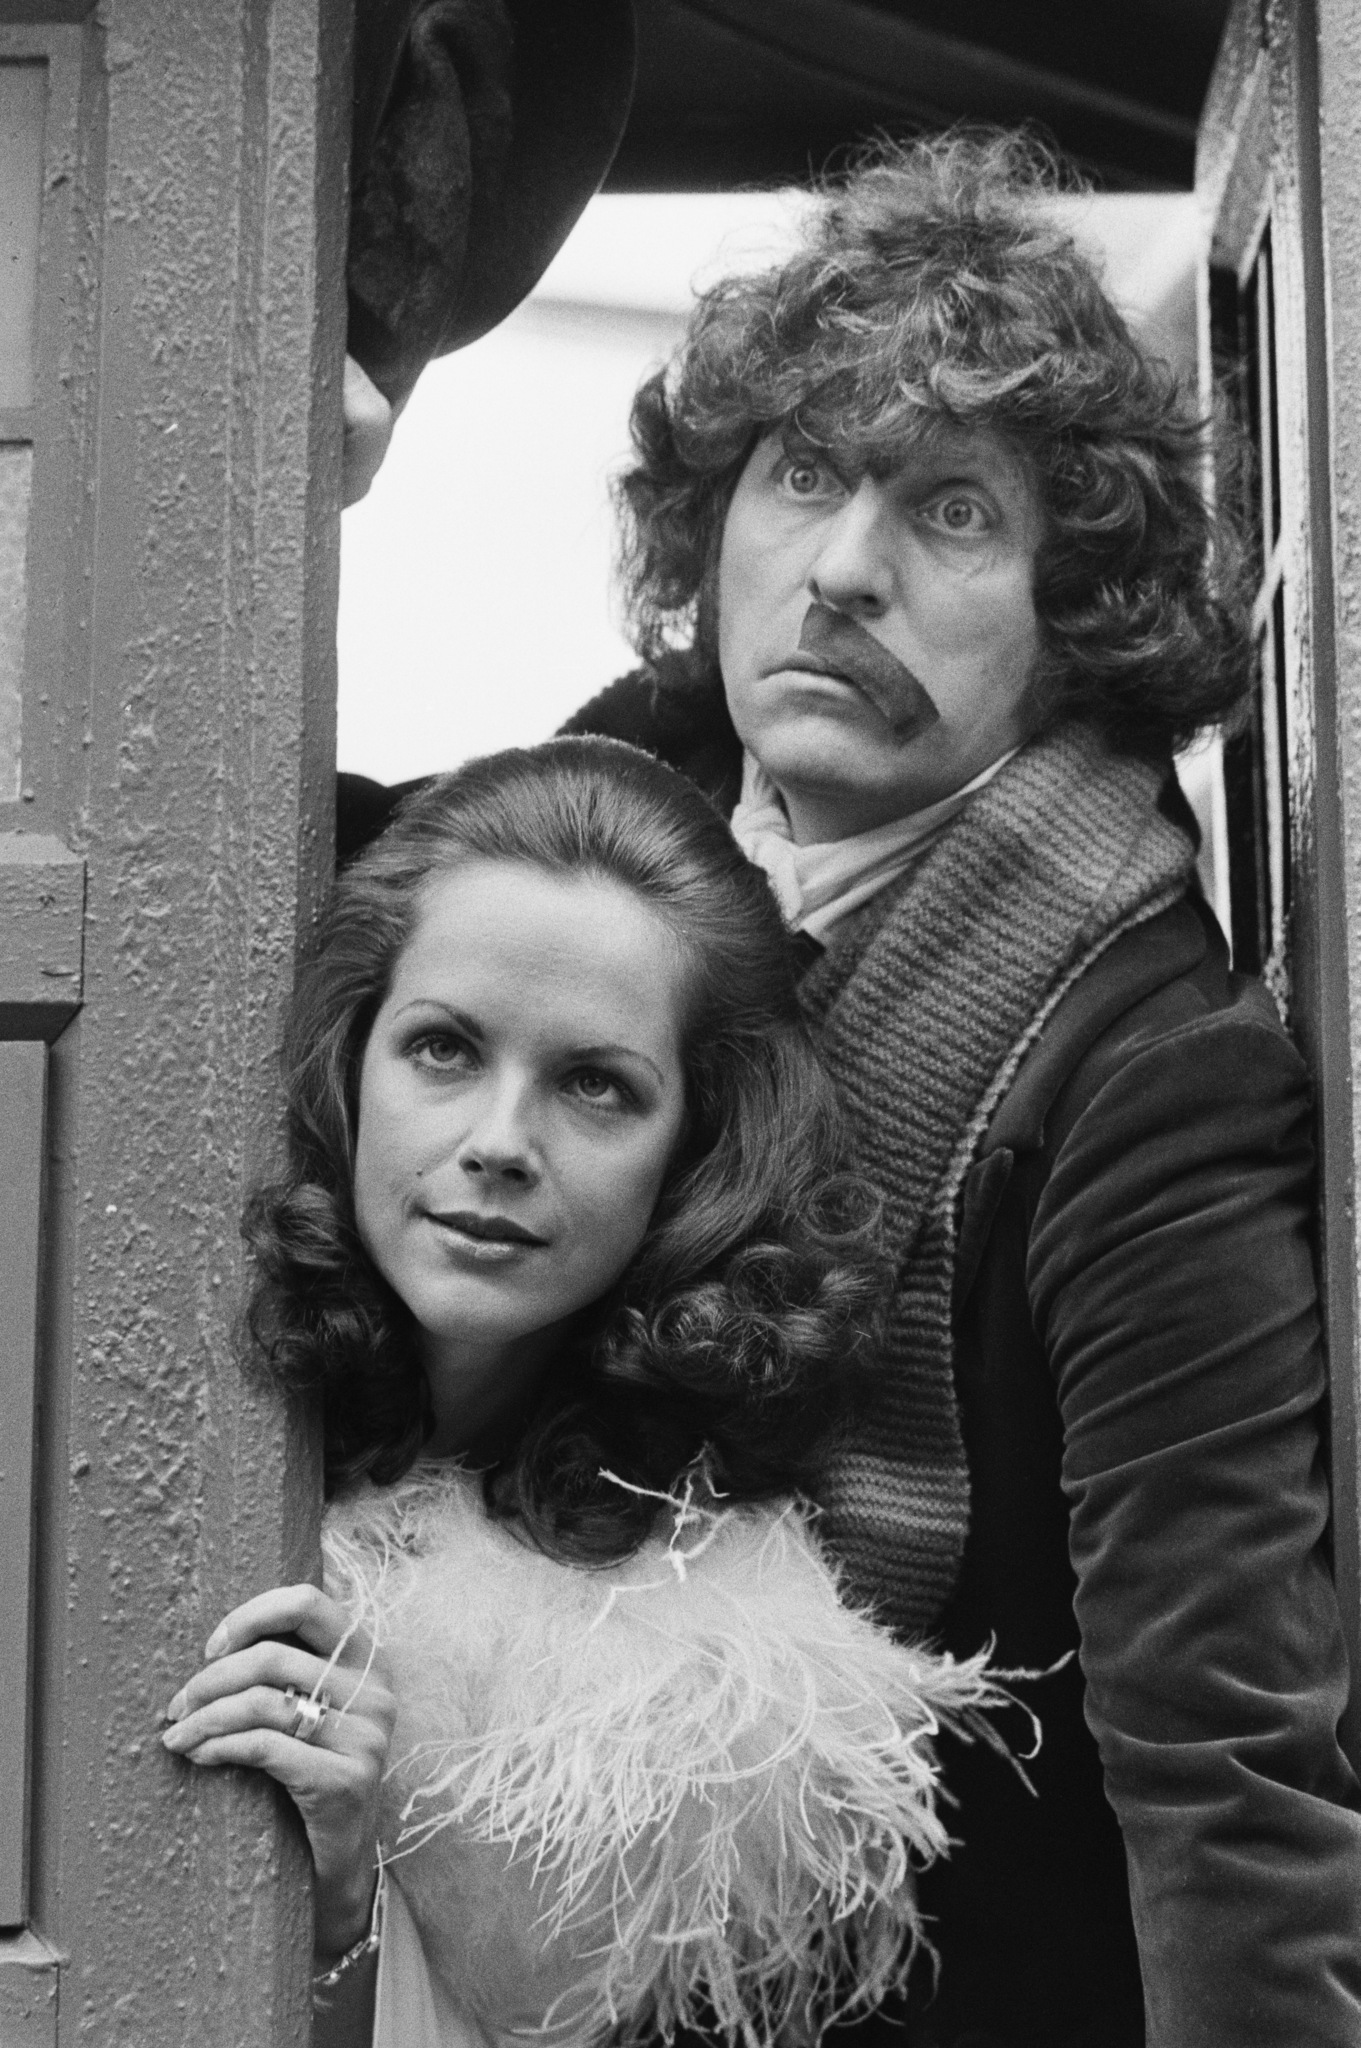 Tom Baker and Mary Tamm